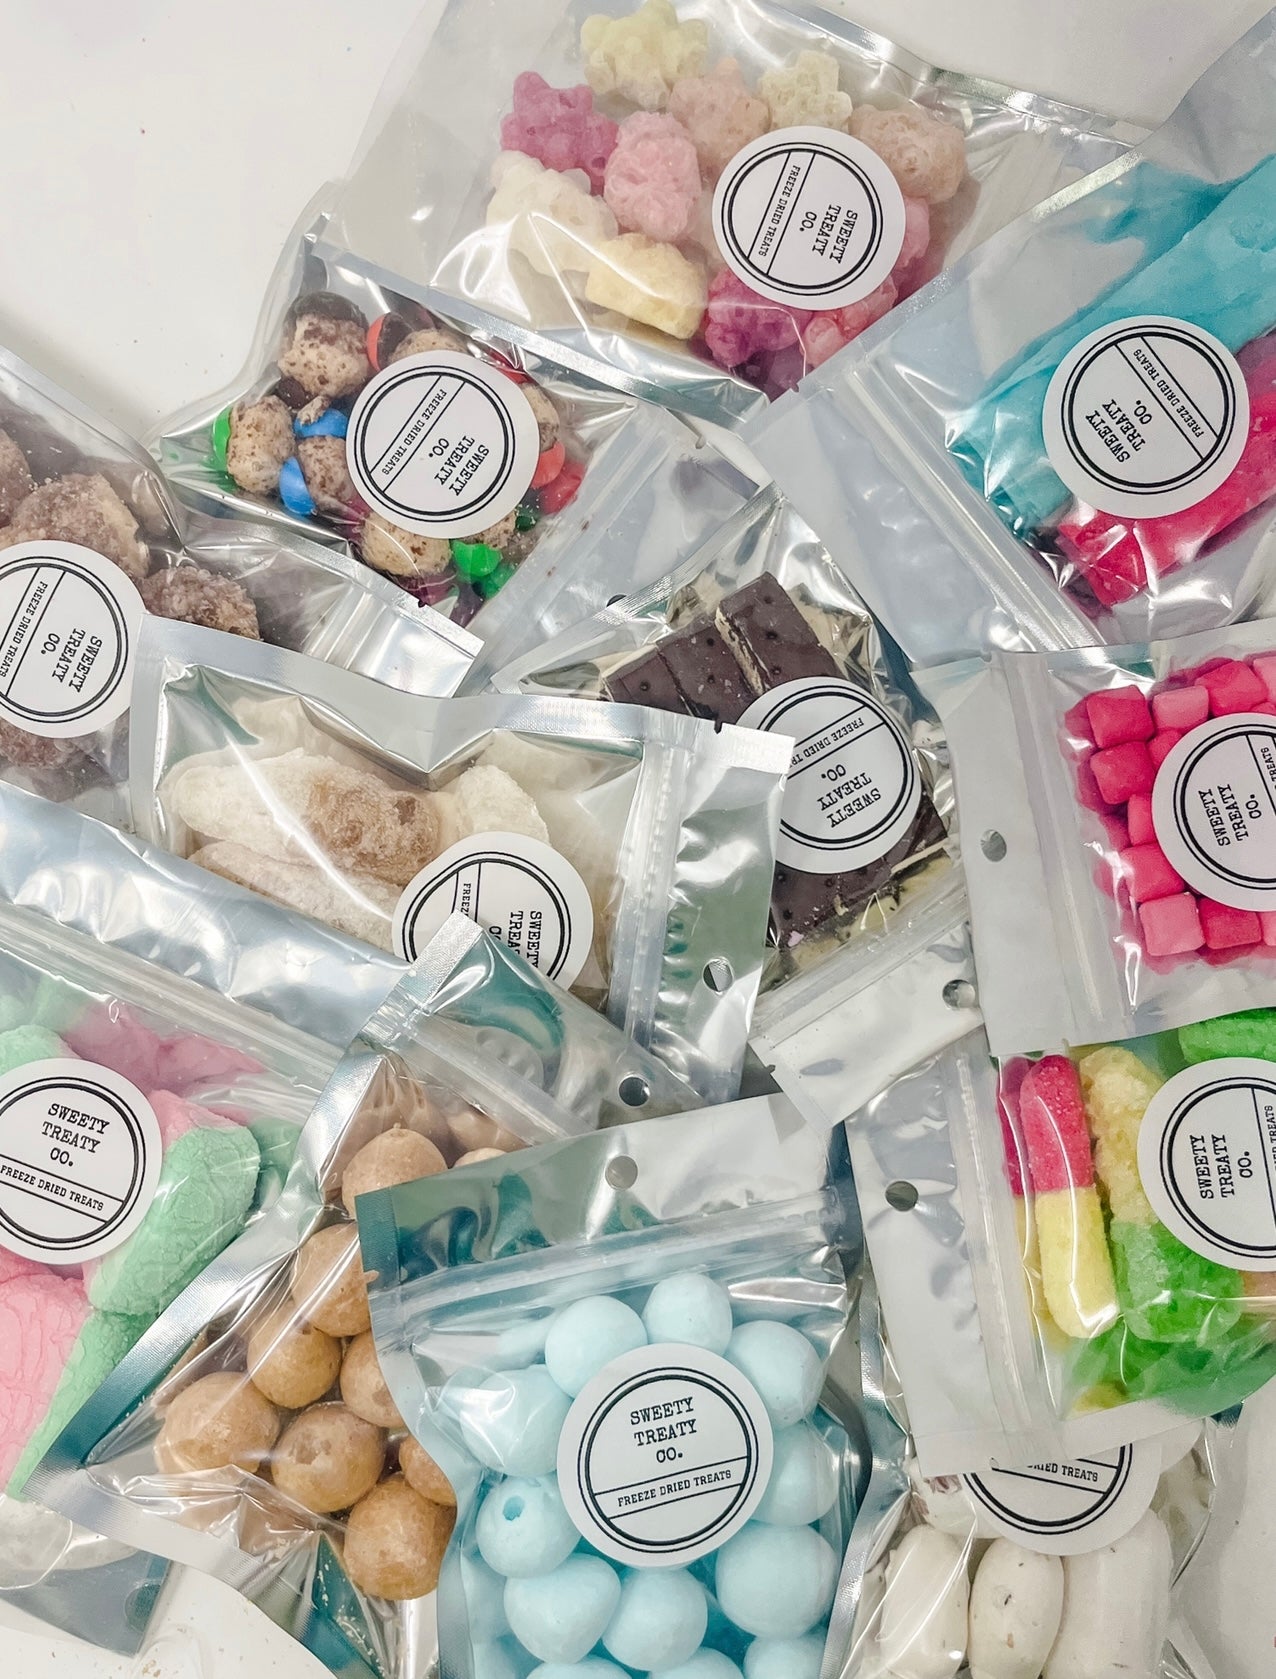 Making freeze-dried treats turns from hobbies into businesses 